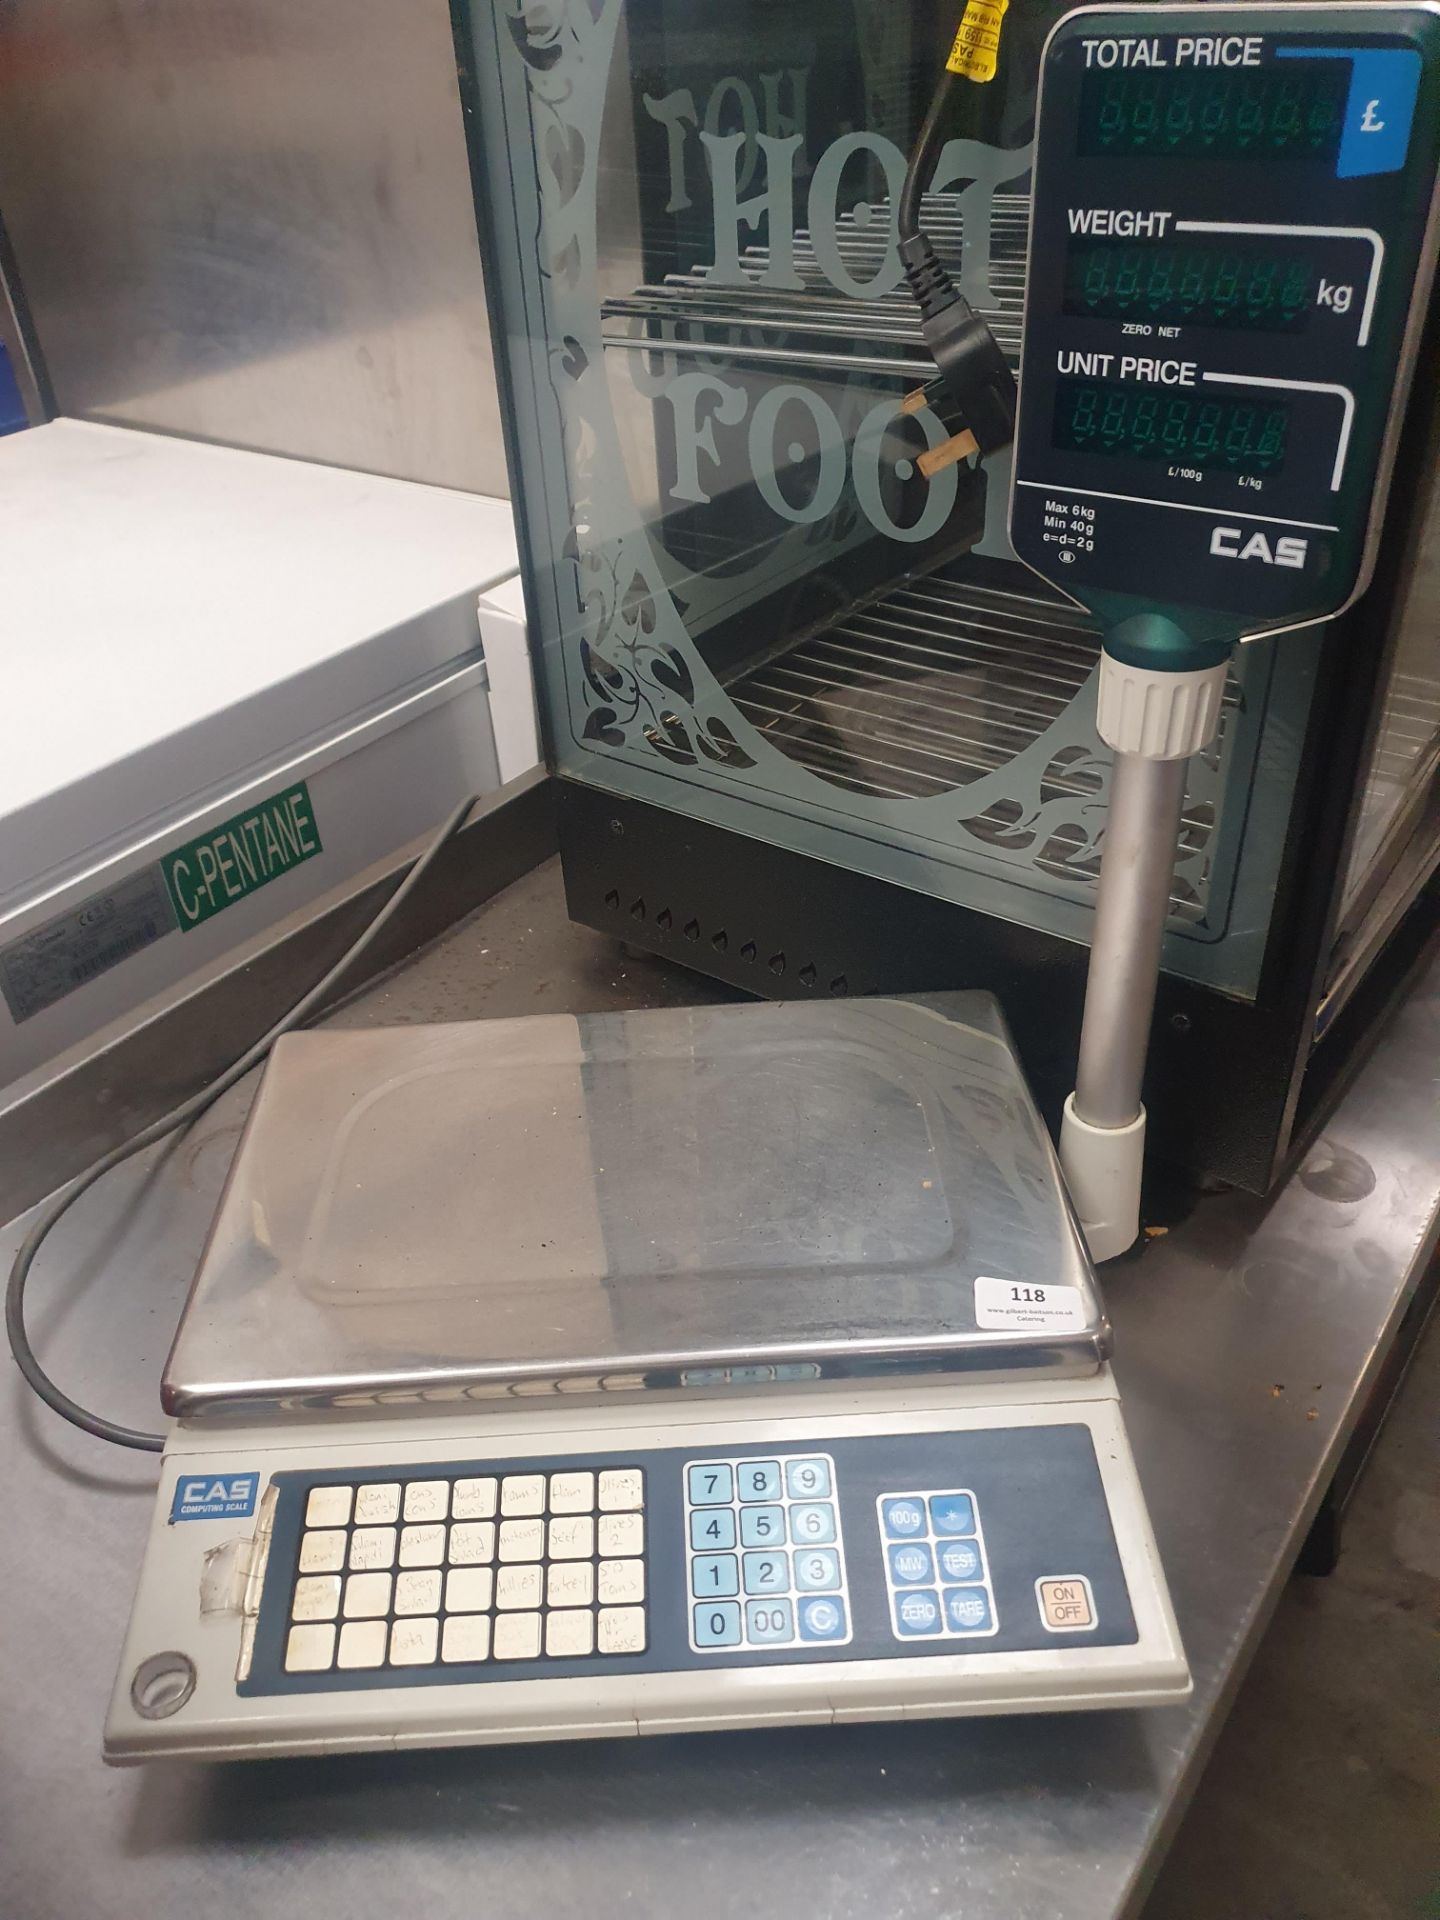 * deli counter weighing scale